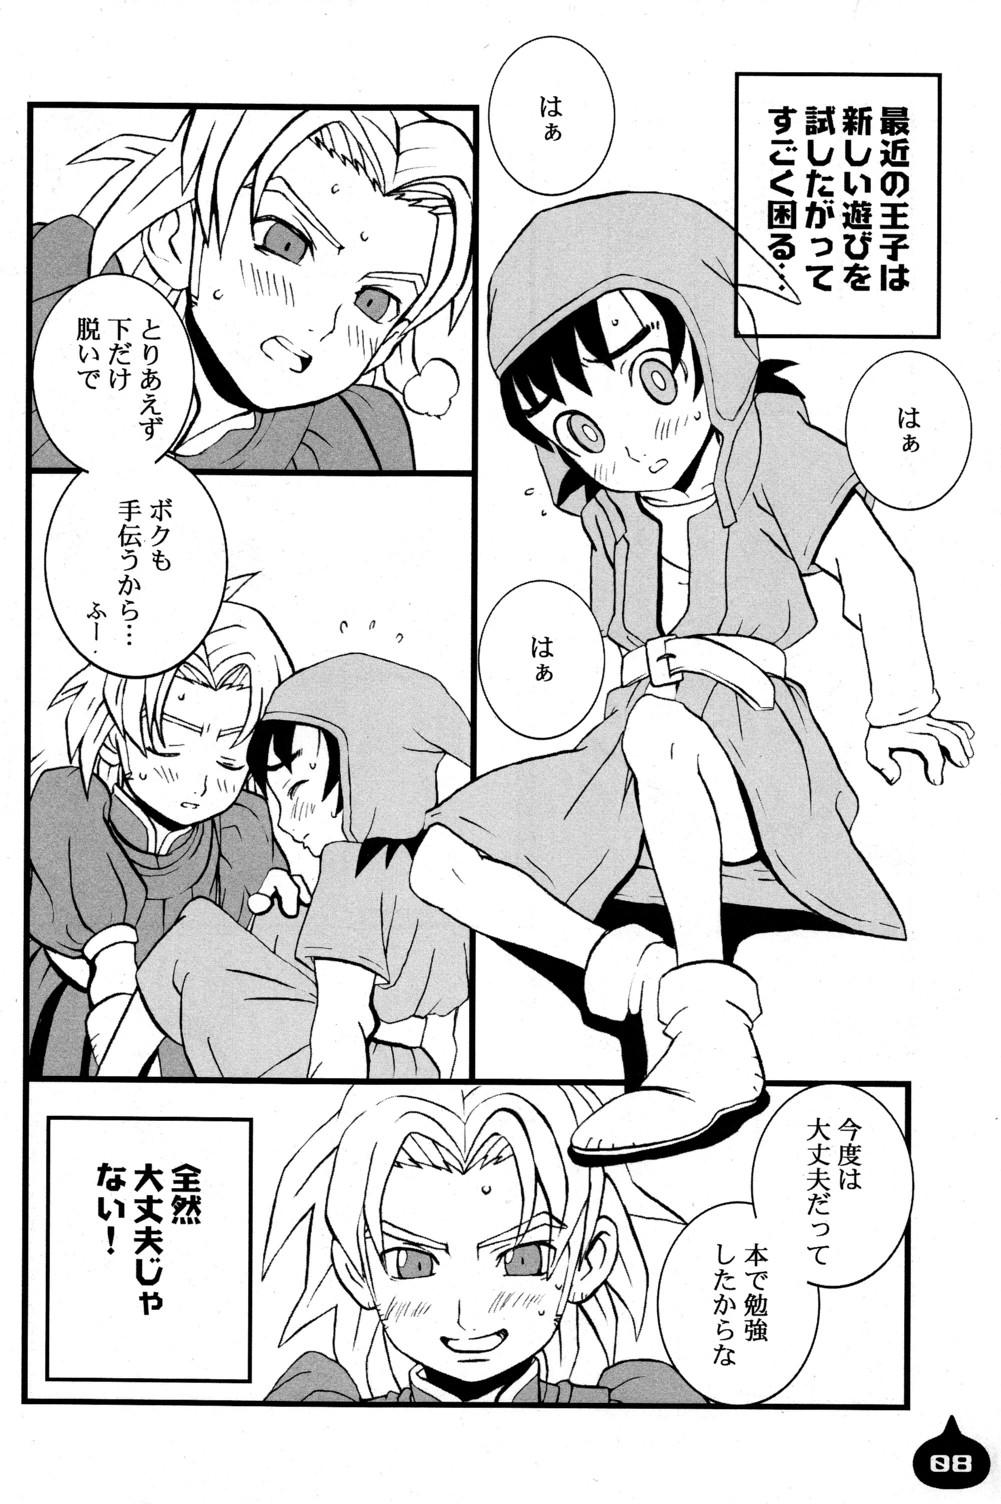 Gay Cut LITTLE L - Dragon quest vii Lord of lords ryu knight | haou taikei ryuu knight Machine - Page 8